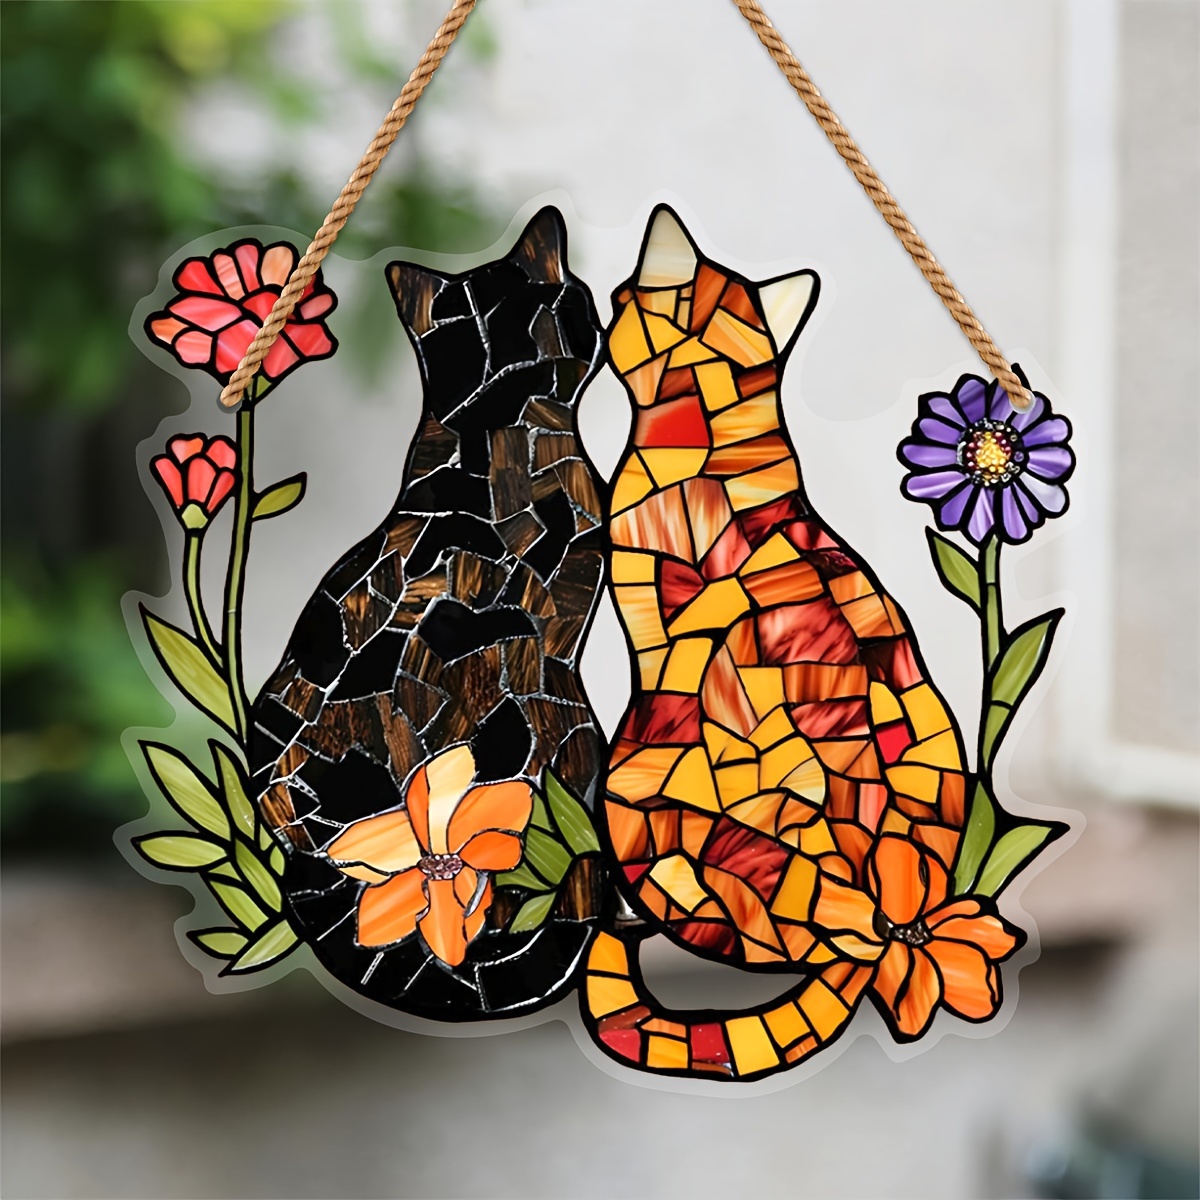 

1pc Acrylic Cat And Flowers Stained Window Hanging Suncatcher, No Electricity Needed, Featherless, Indoor Outdoor Hanging Home Decor Garden Decoration, Cat Lover Gift Wall Art.